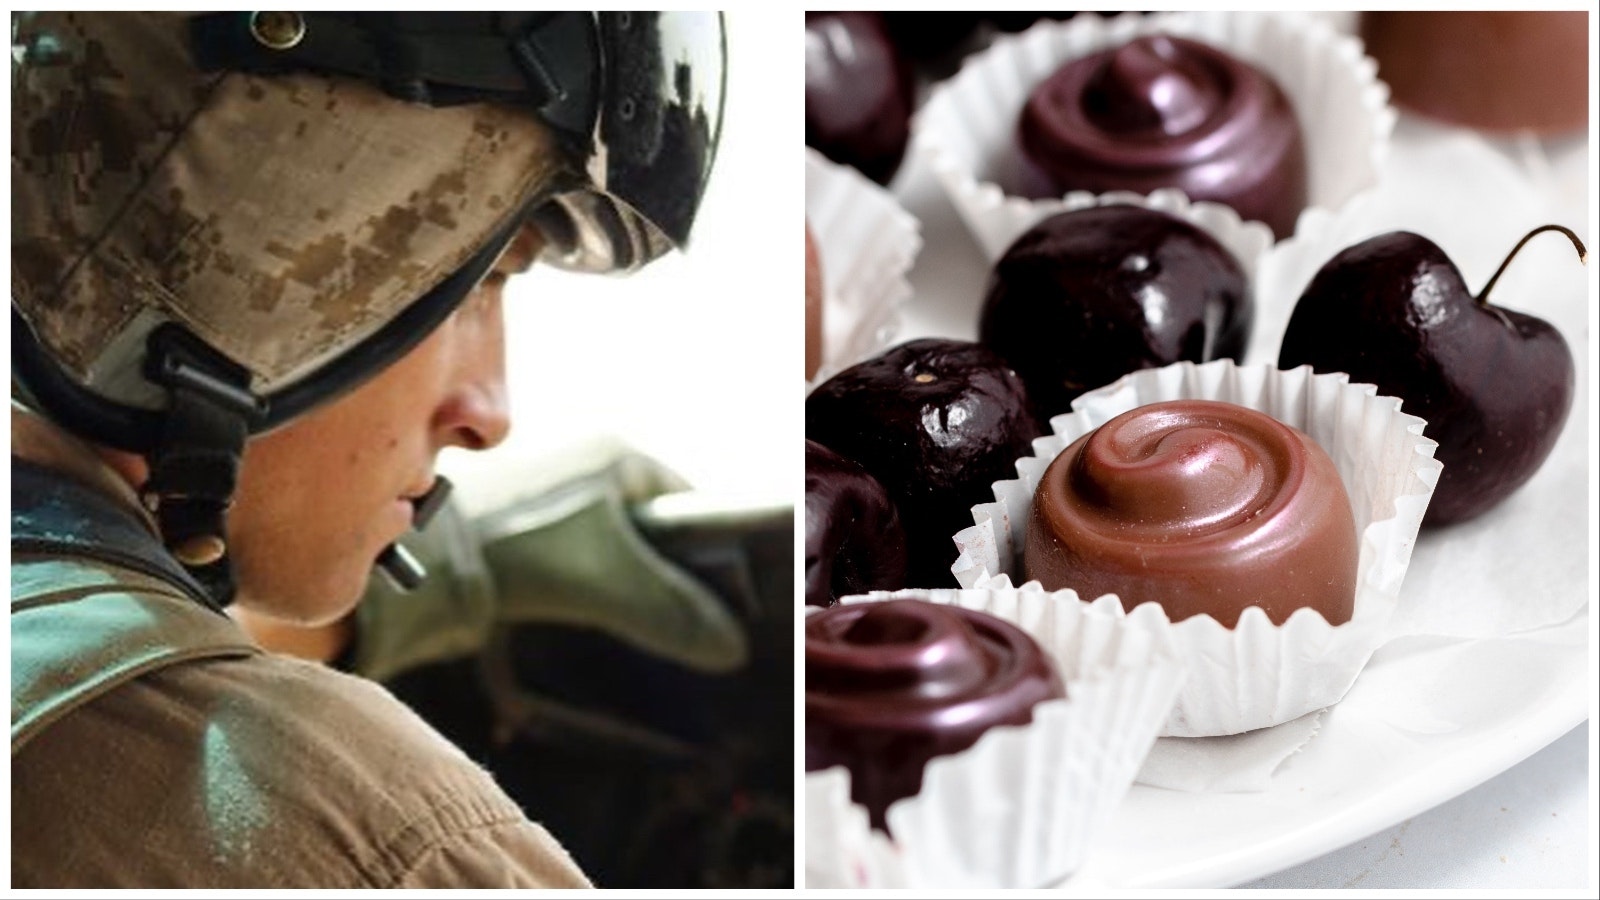 Brandon Busch pilots a helicopter during his decade in the U.S. Marine Corps, left, and some of the delicate confections he creates now at Lift Chocolates.